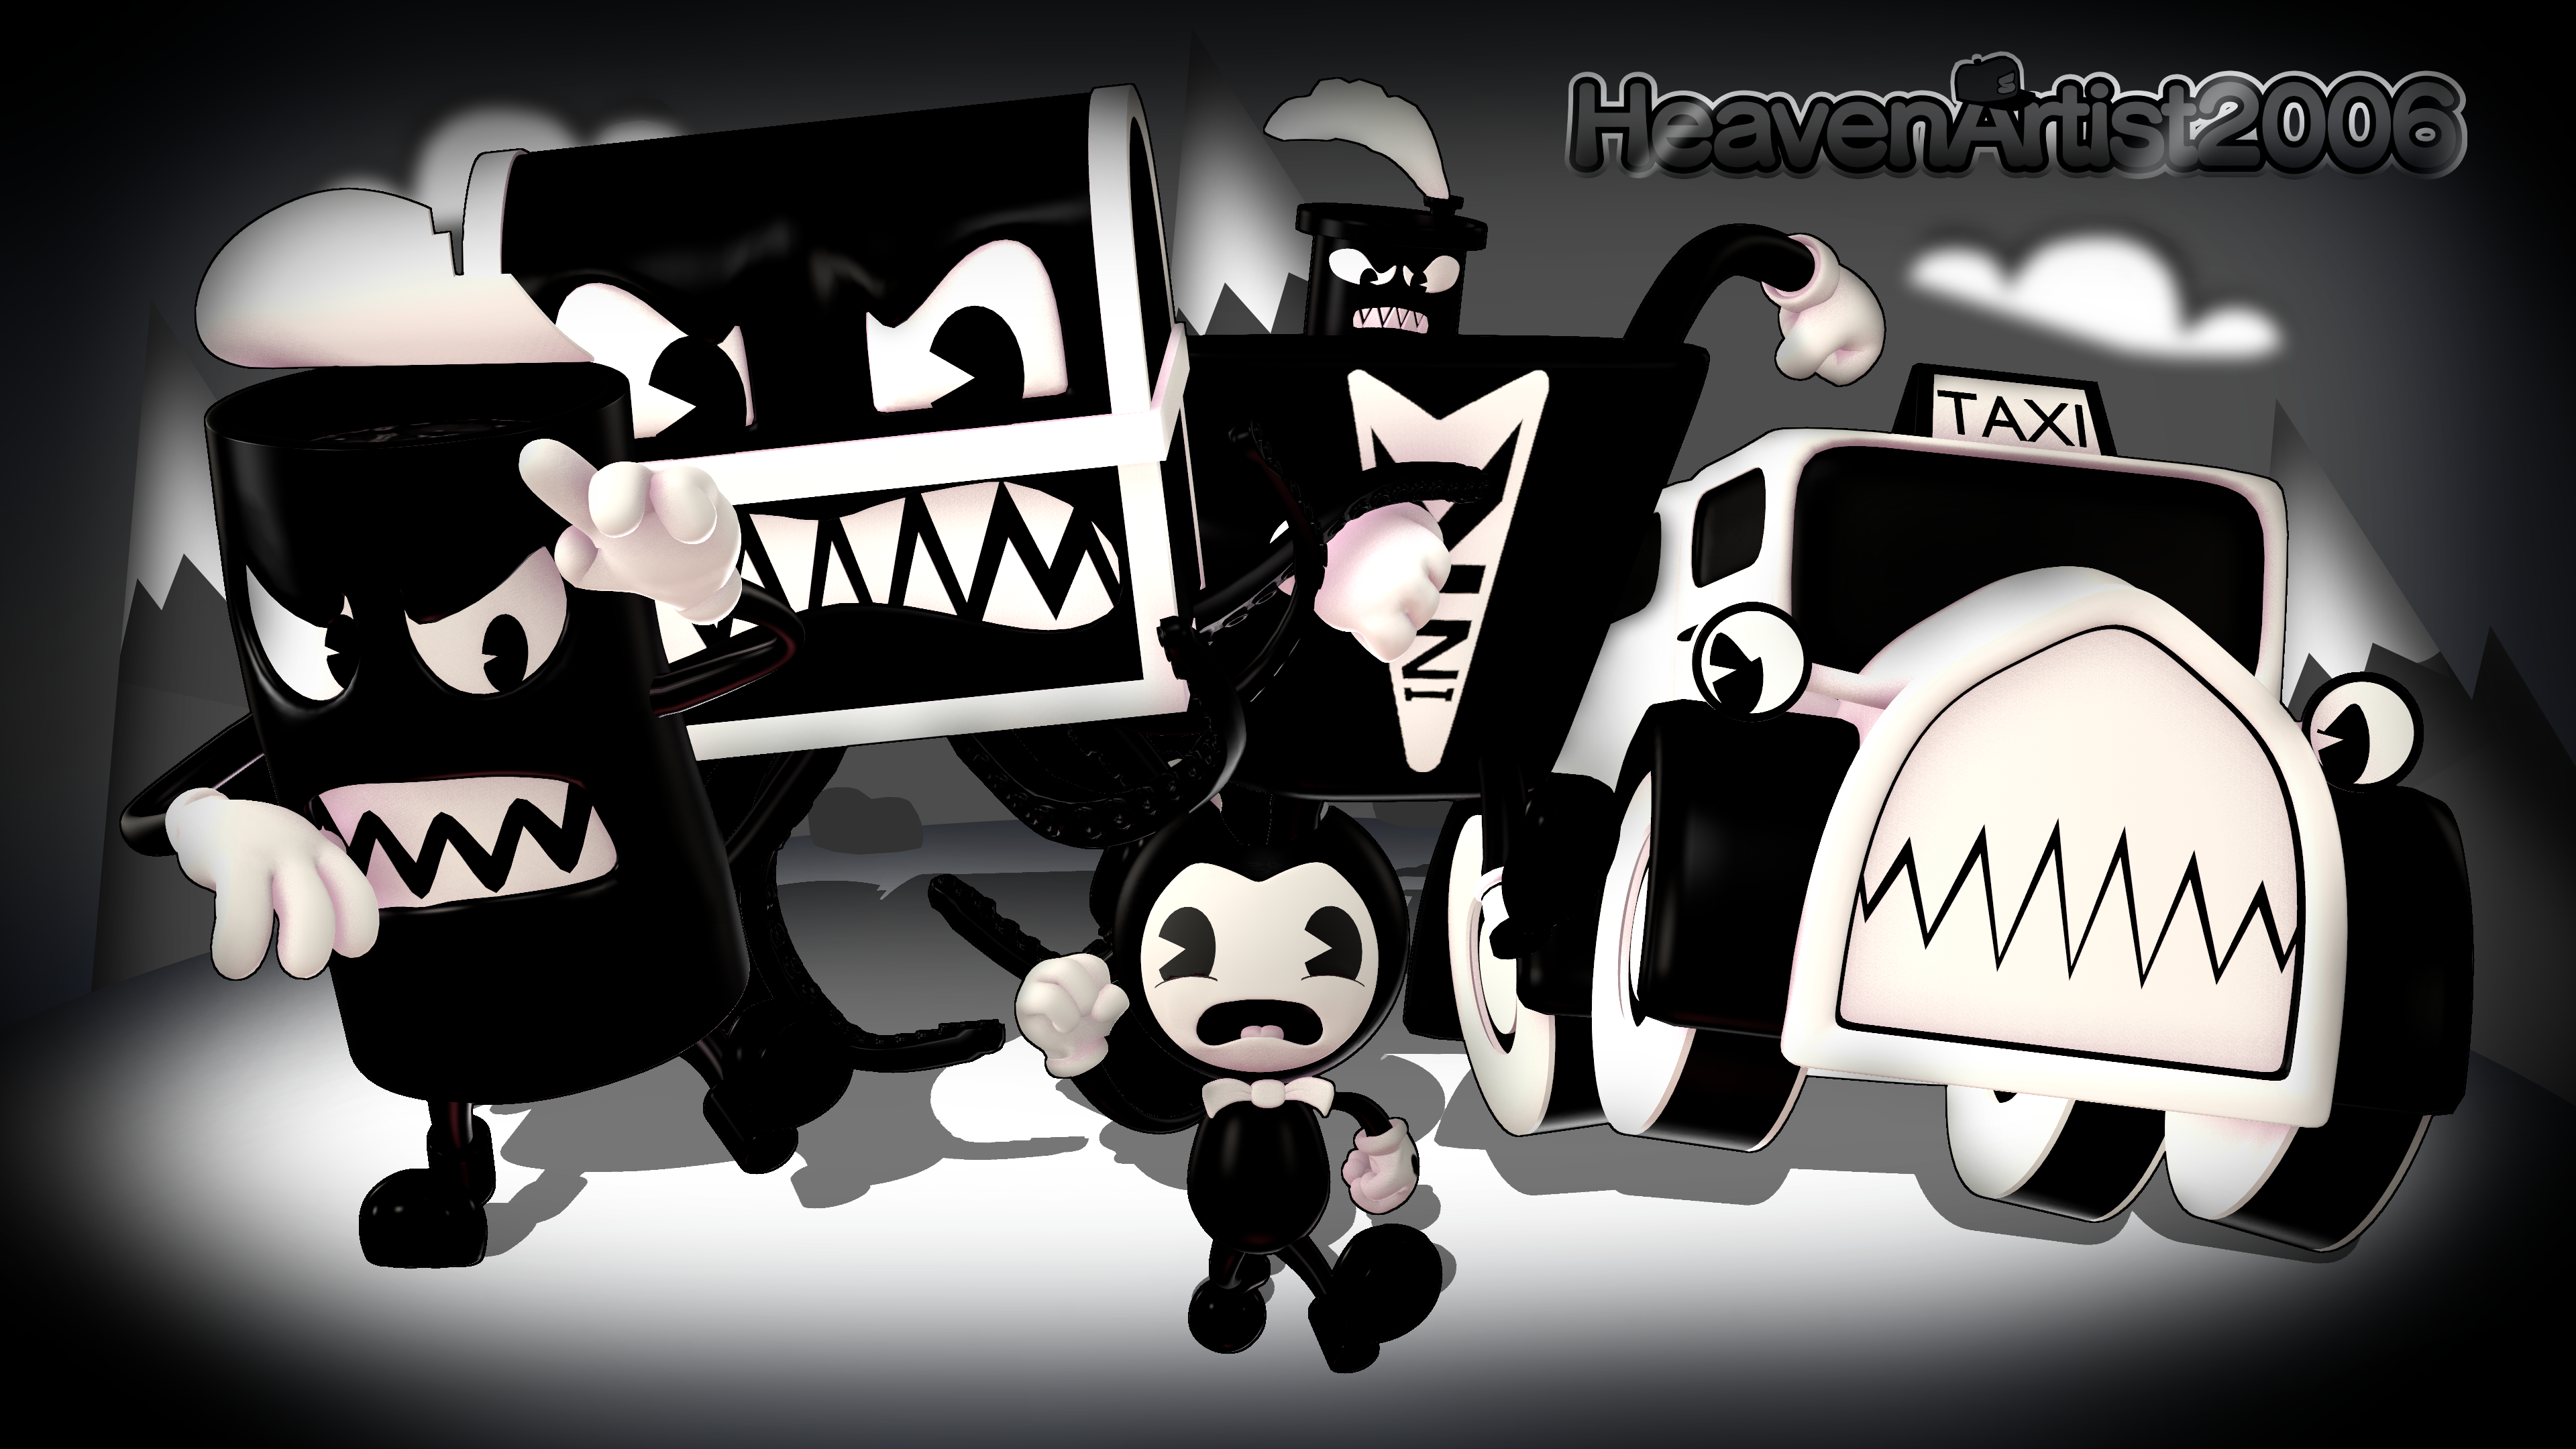 Bendy in Nightmare Run APK Download for Android Free